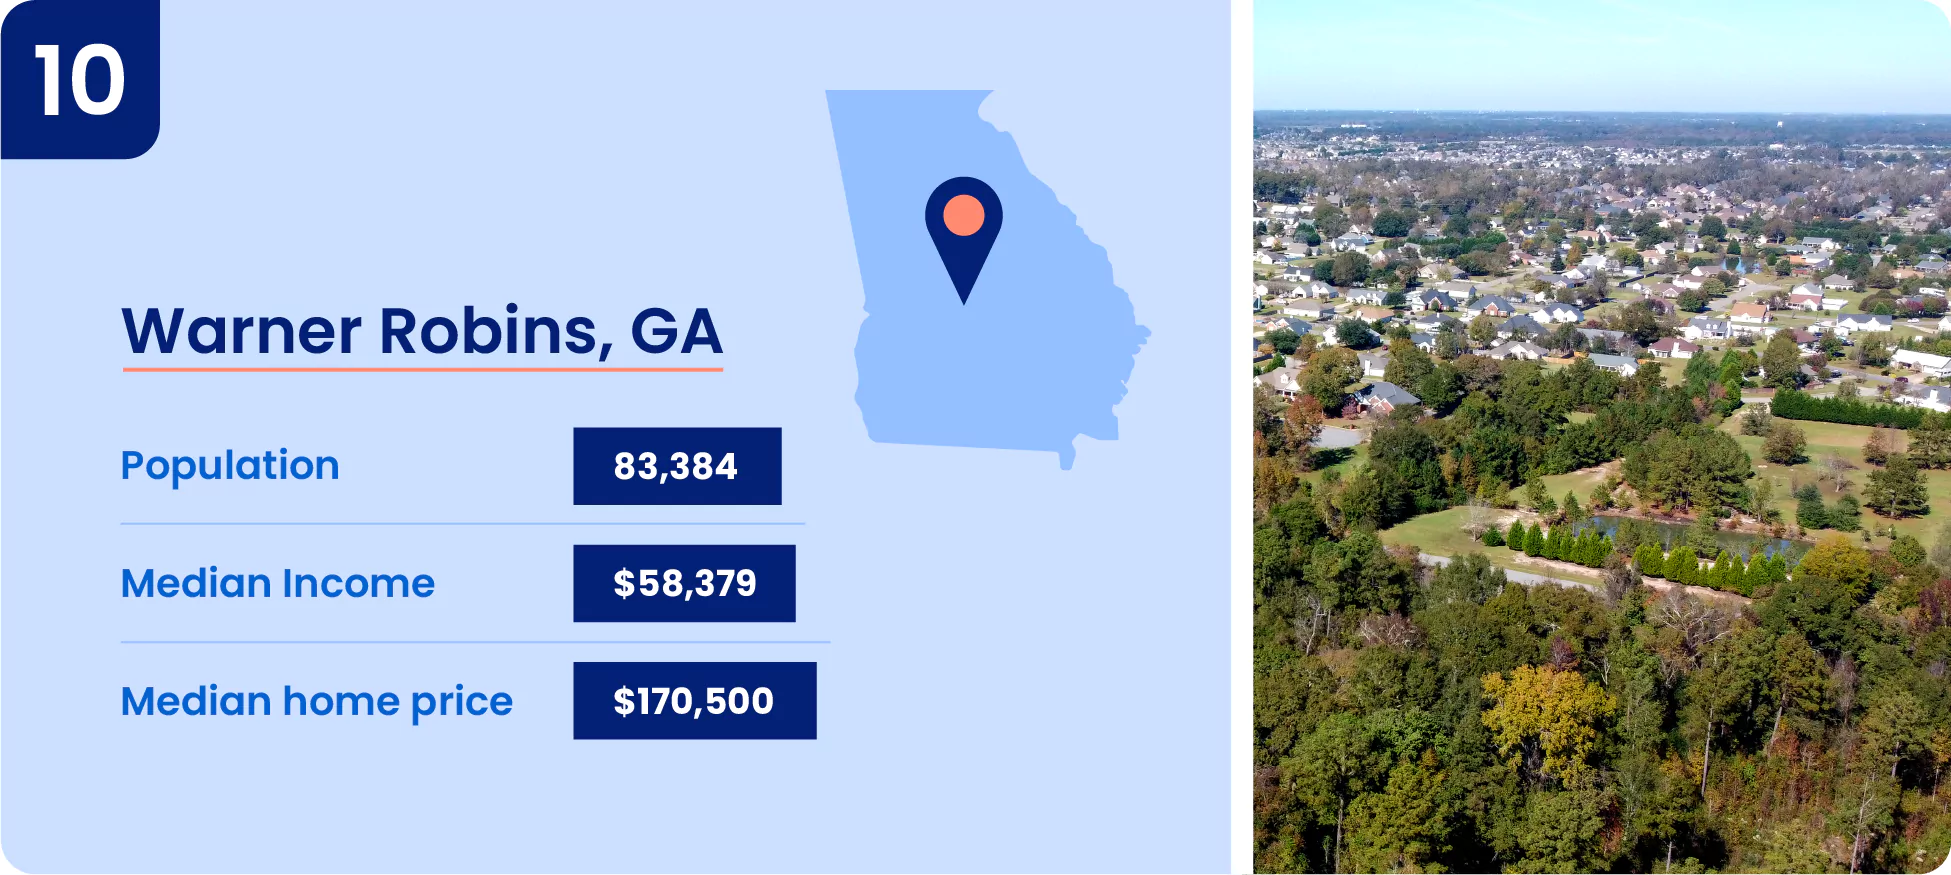 Image shows key information about one of the cheapest place to live in Georgia, the city of Warner Robins.